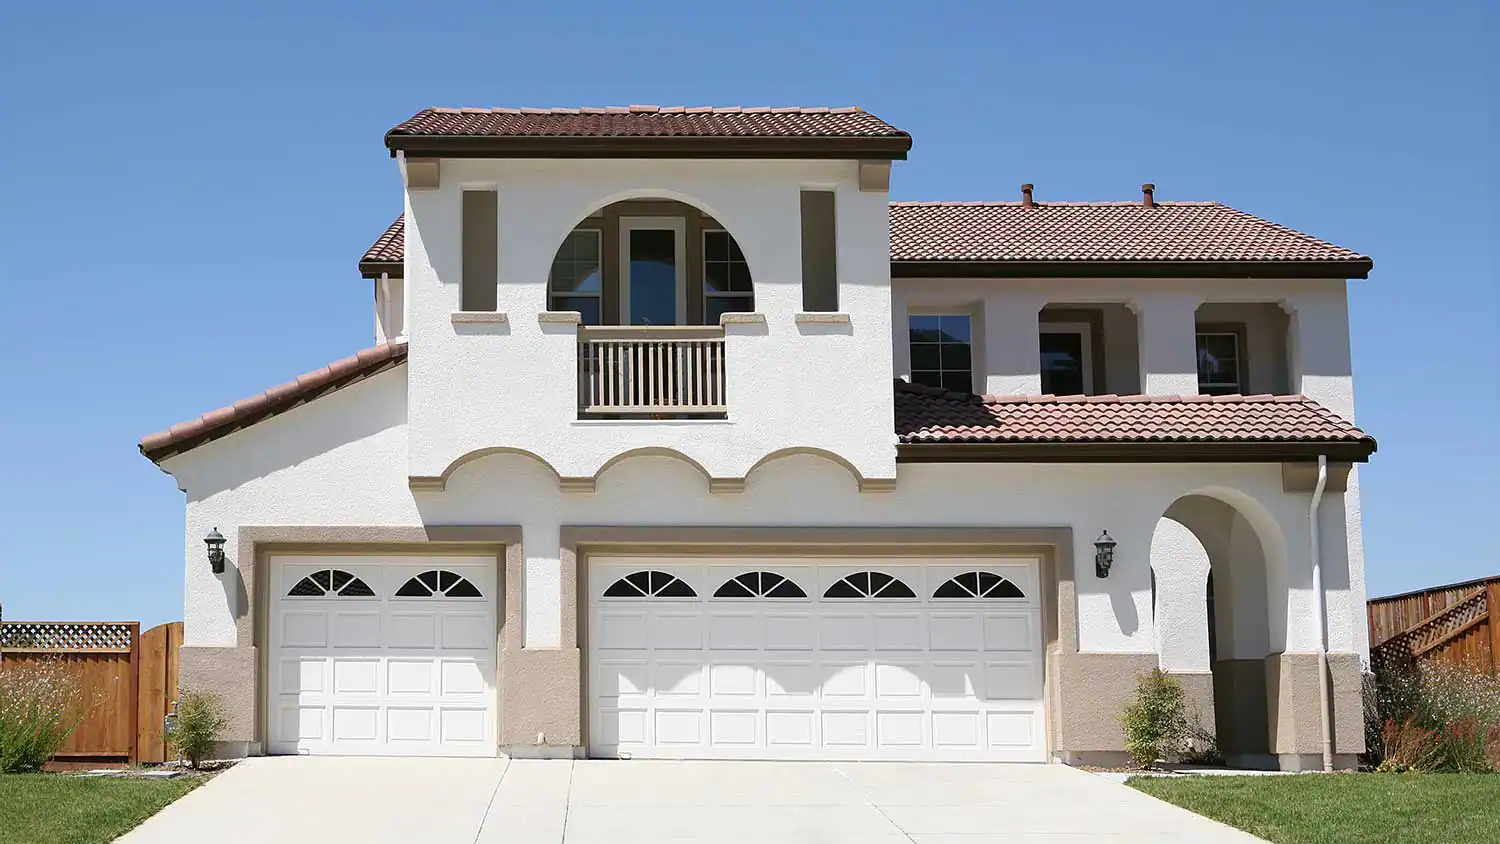 Is It a Risk to Buy Stucco House